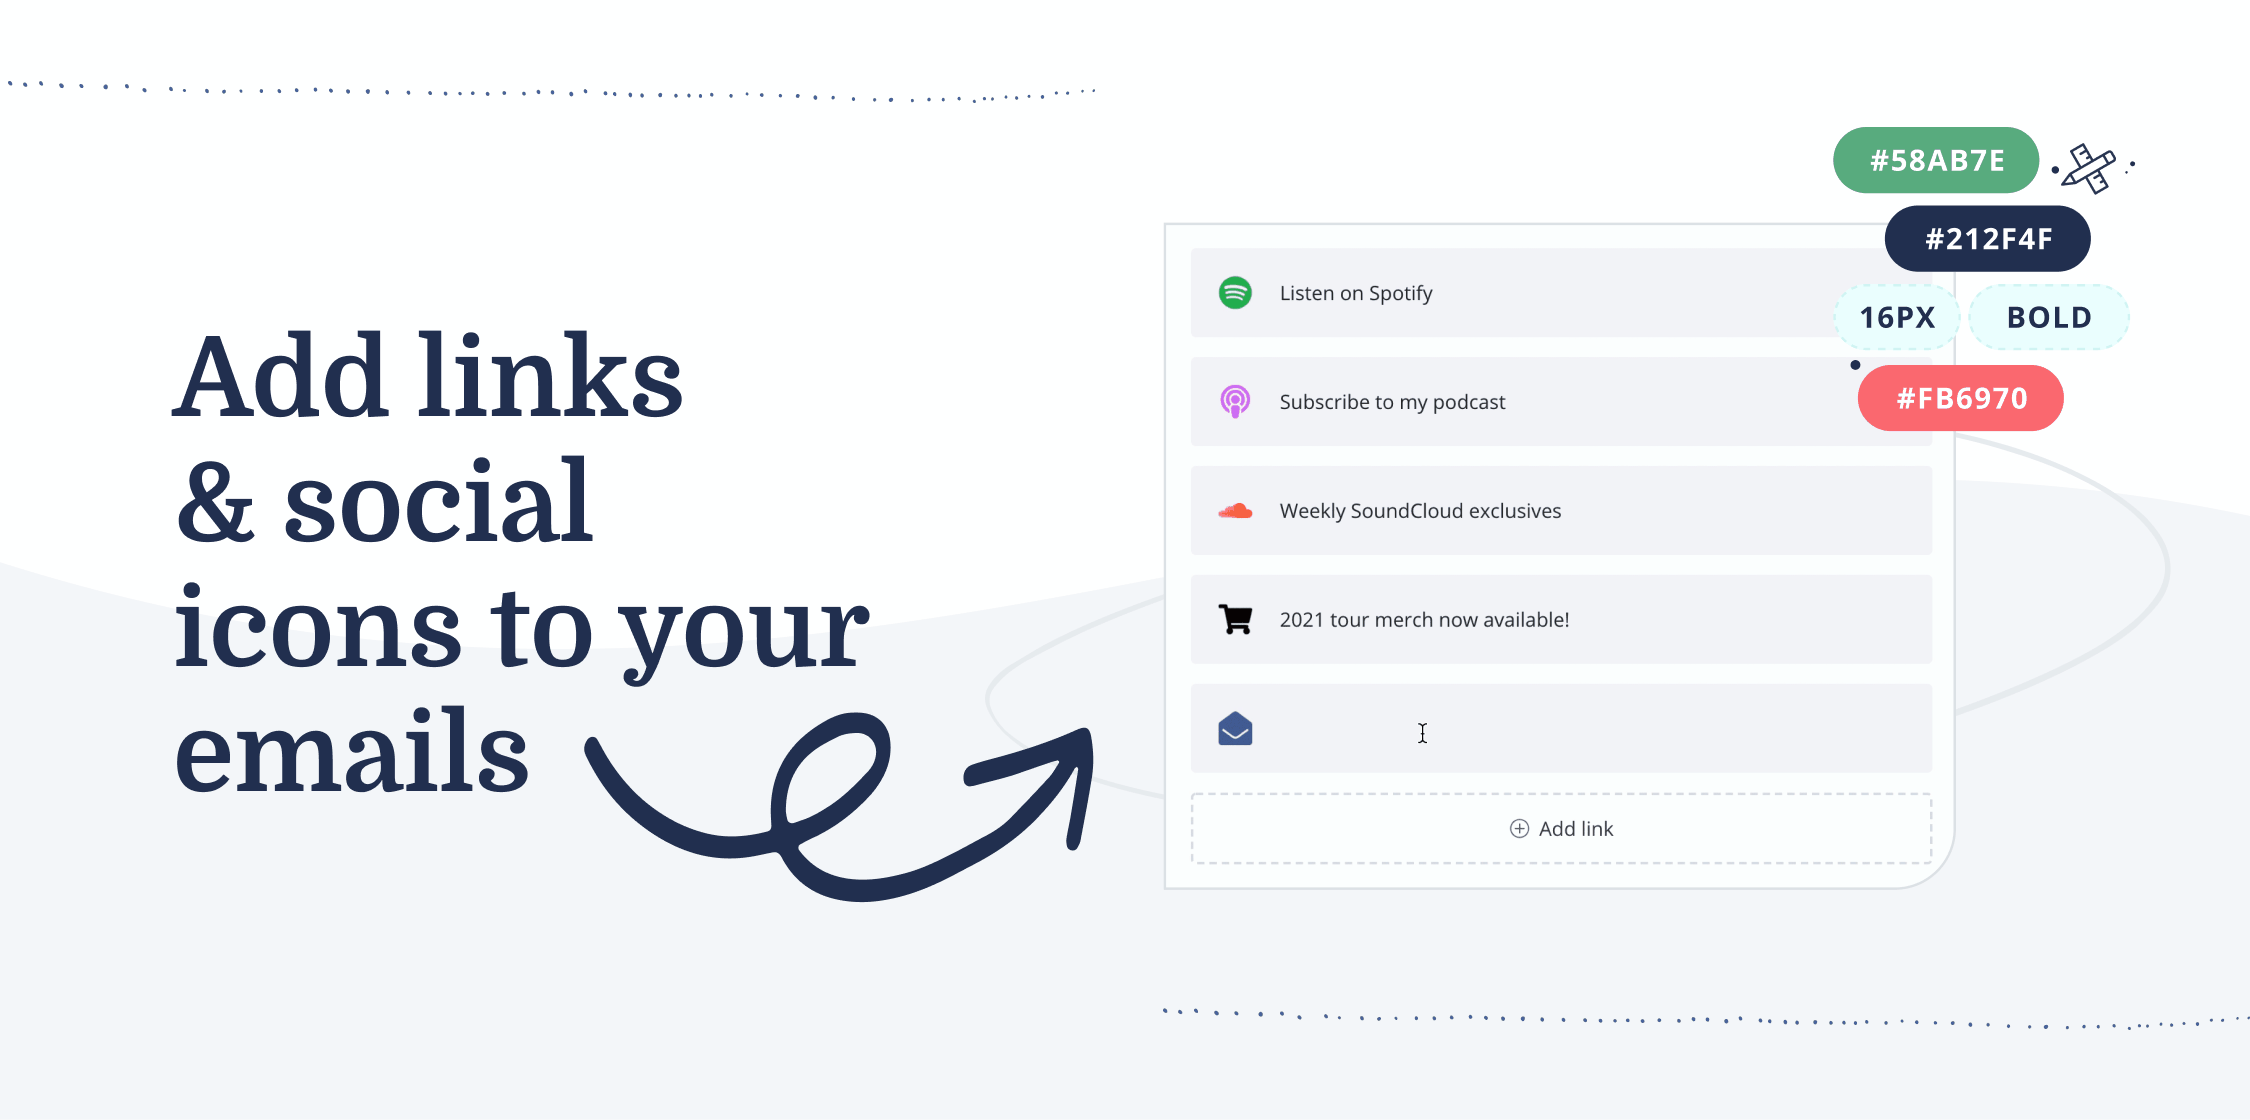 Learn more about adding social links and icons in emails